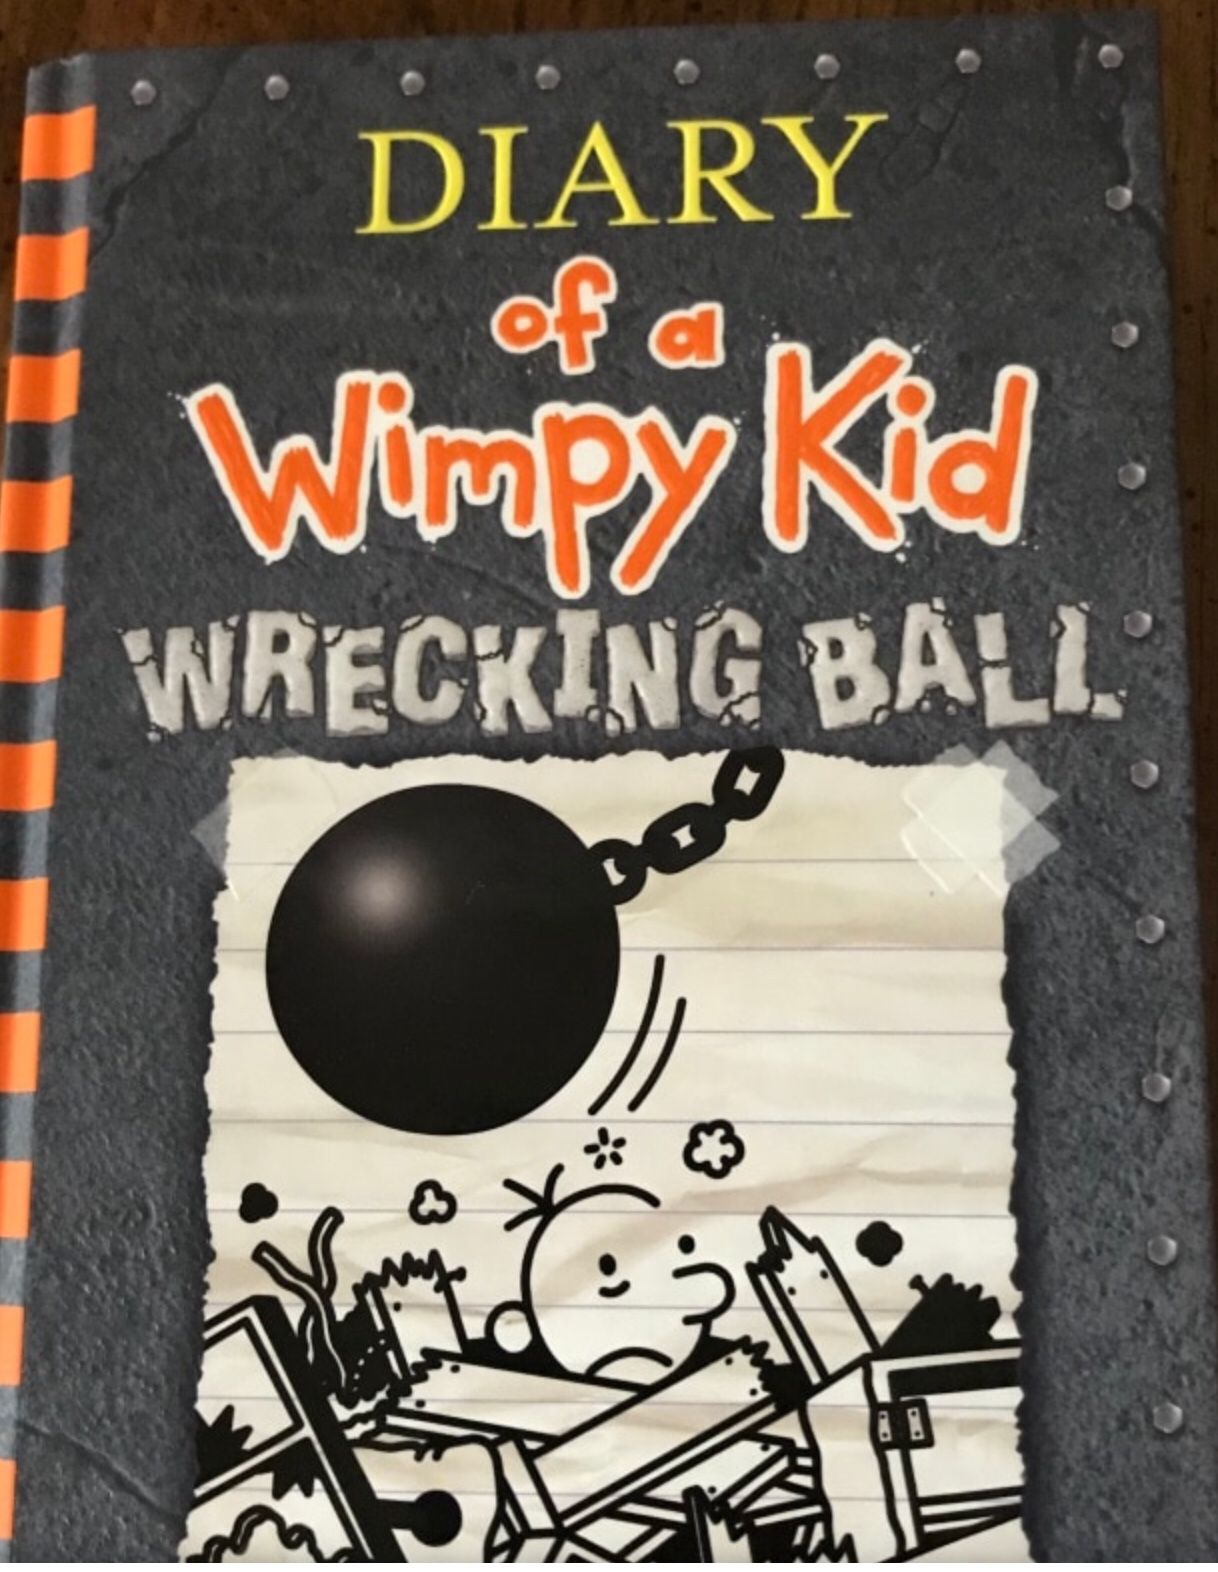 “Diary of a wimpy kid – wrecking ball” chpt book